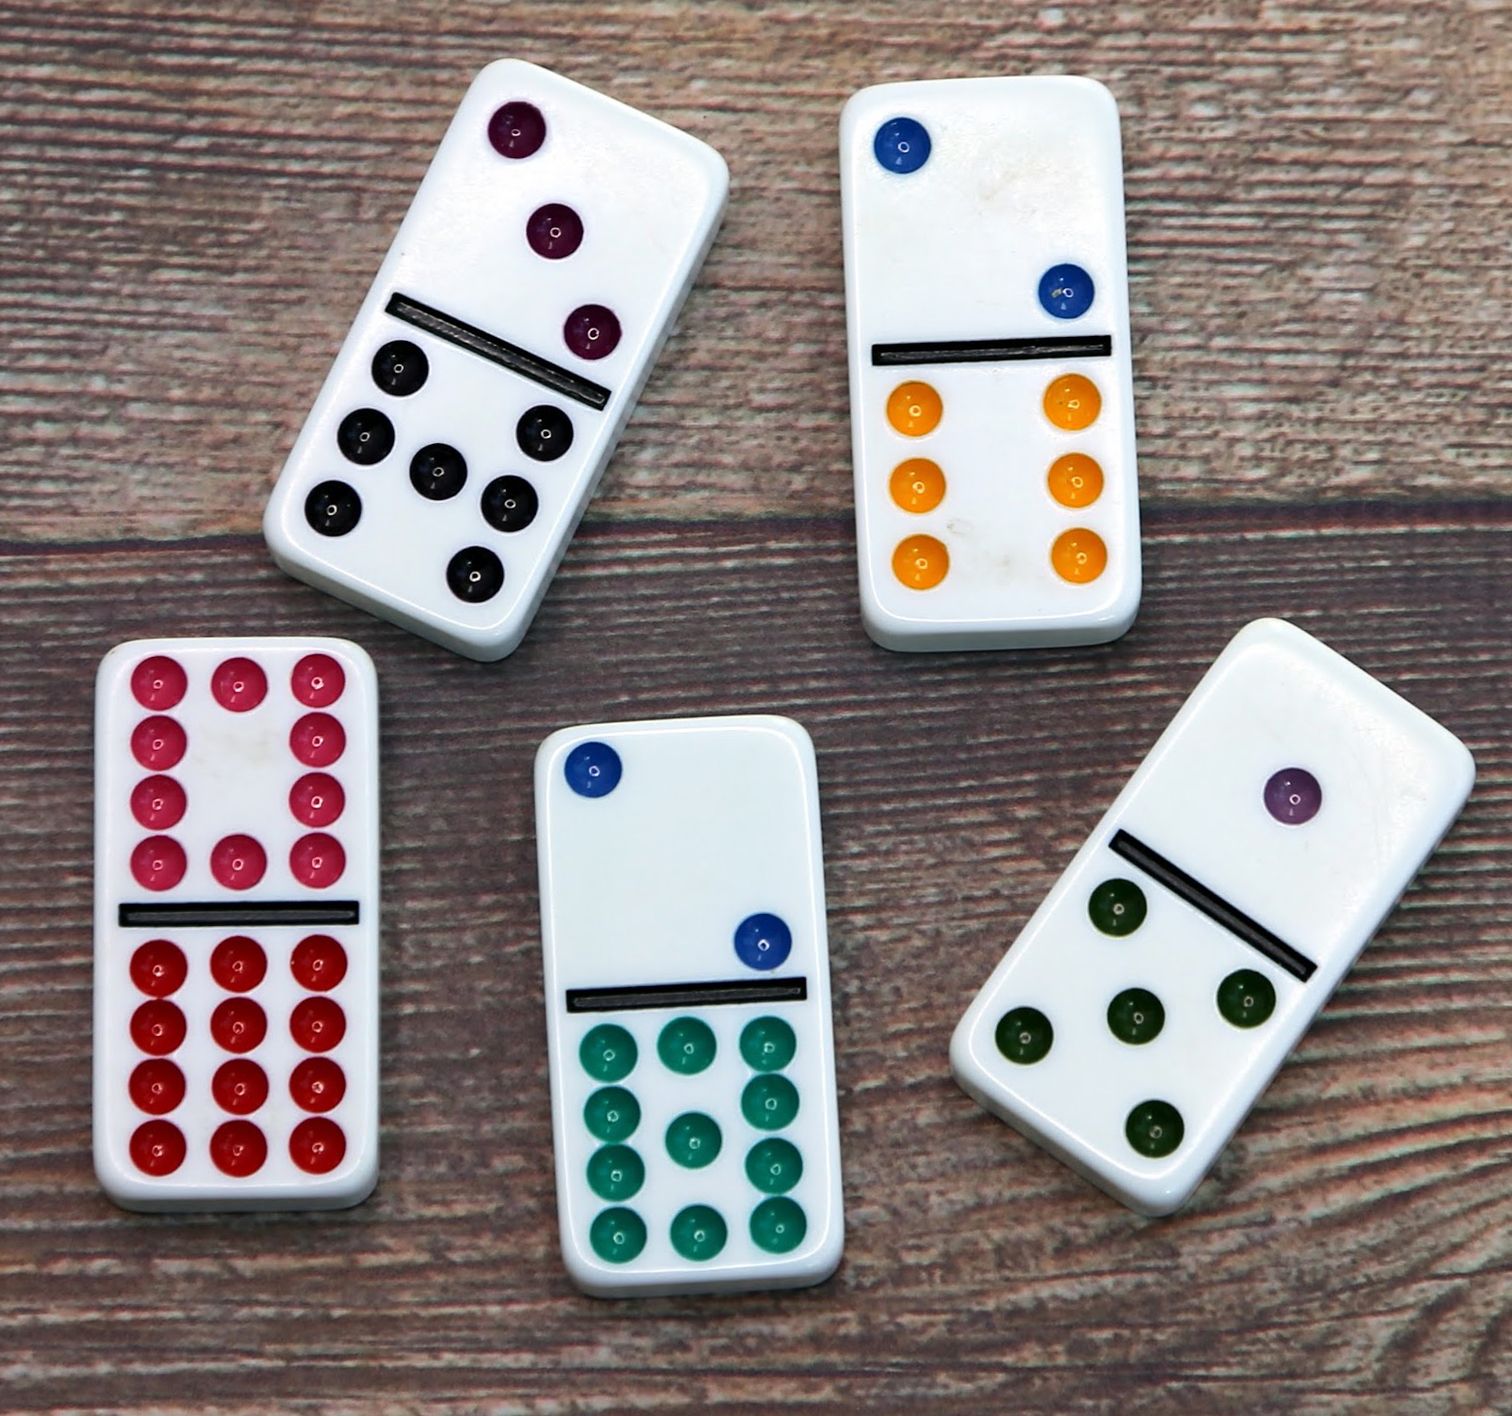 Play Fraction War with Dominoes